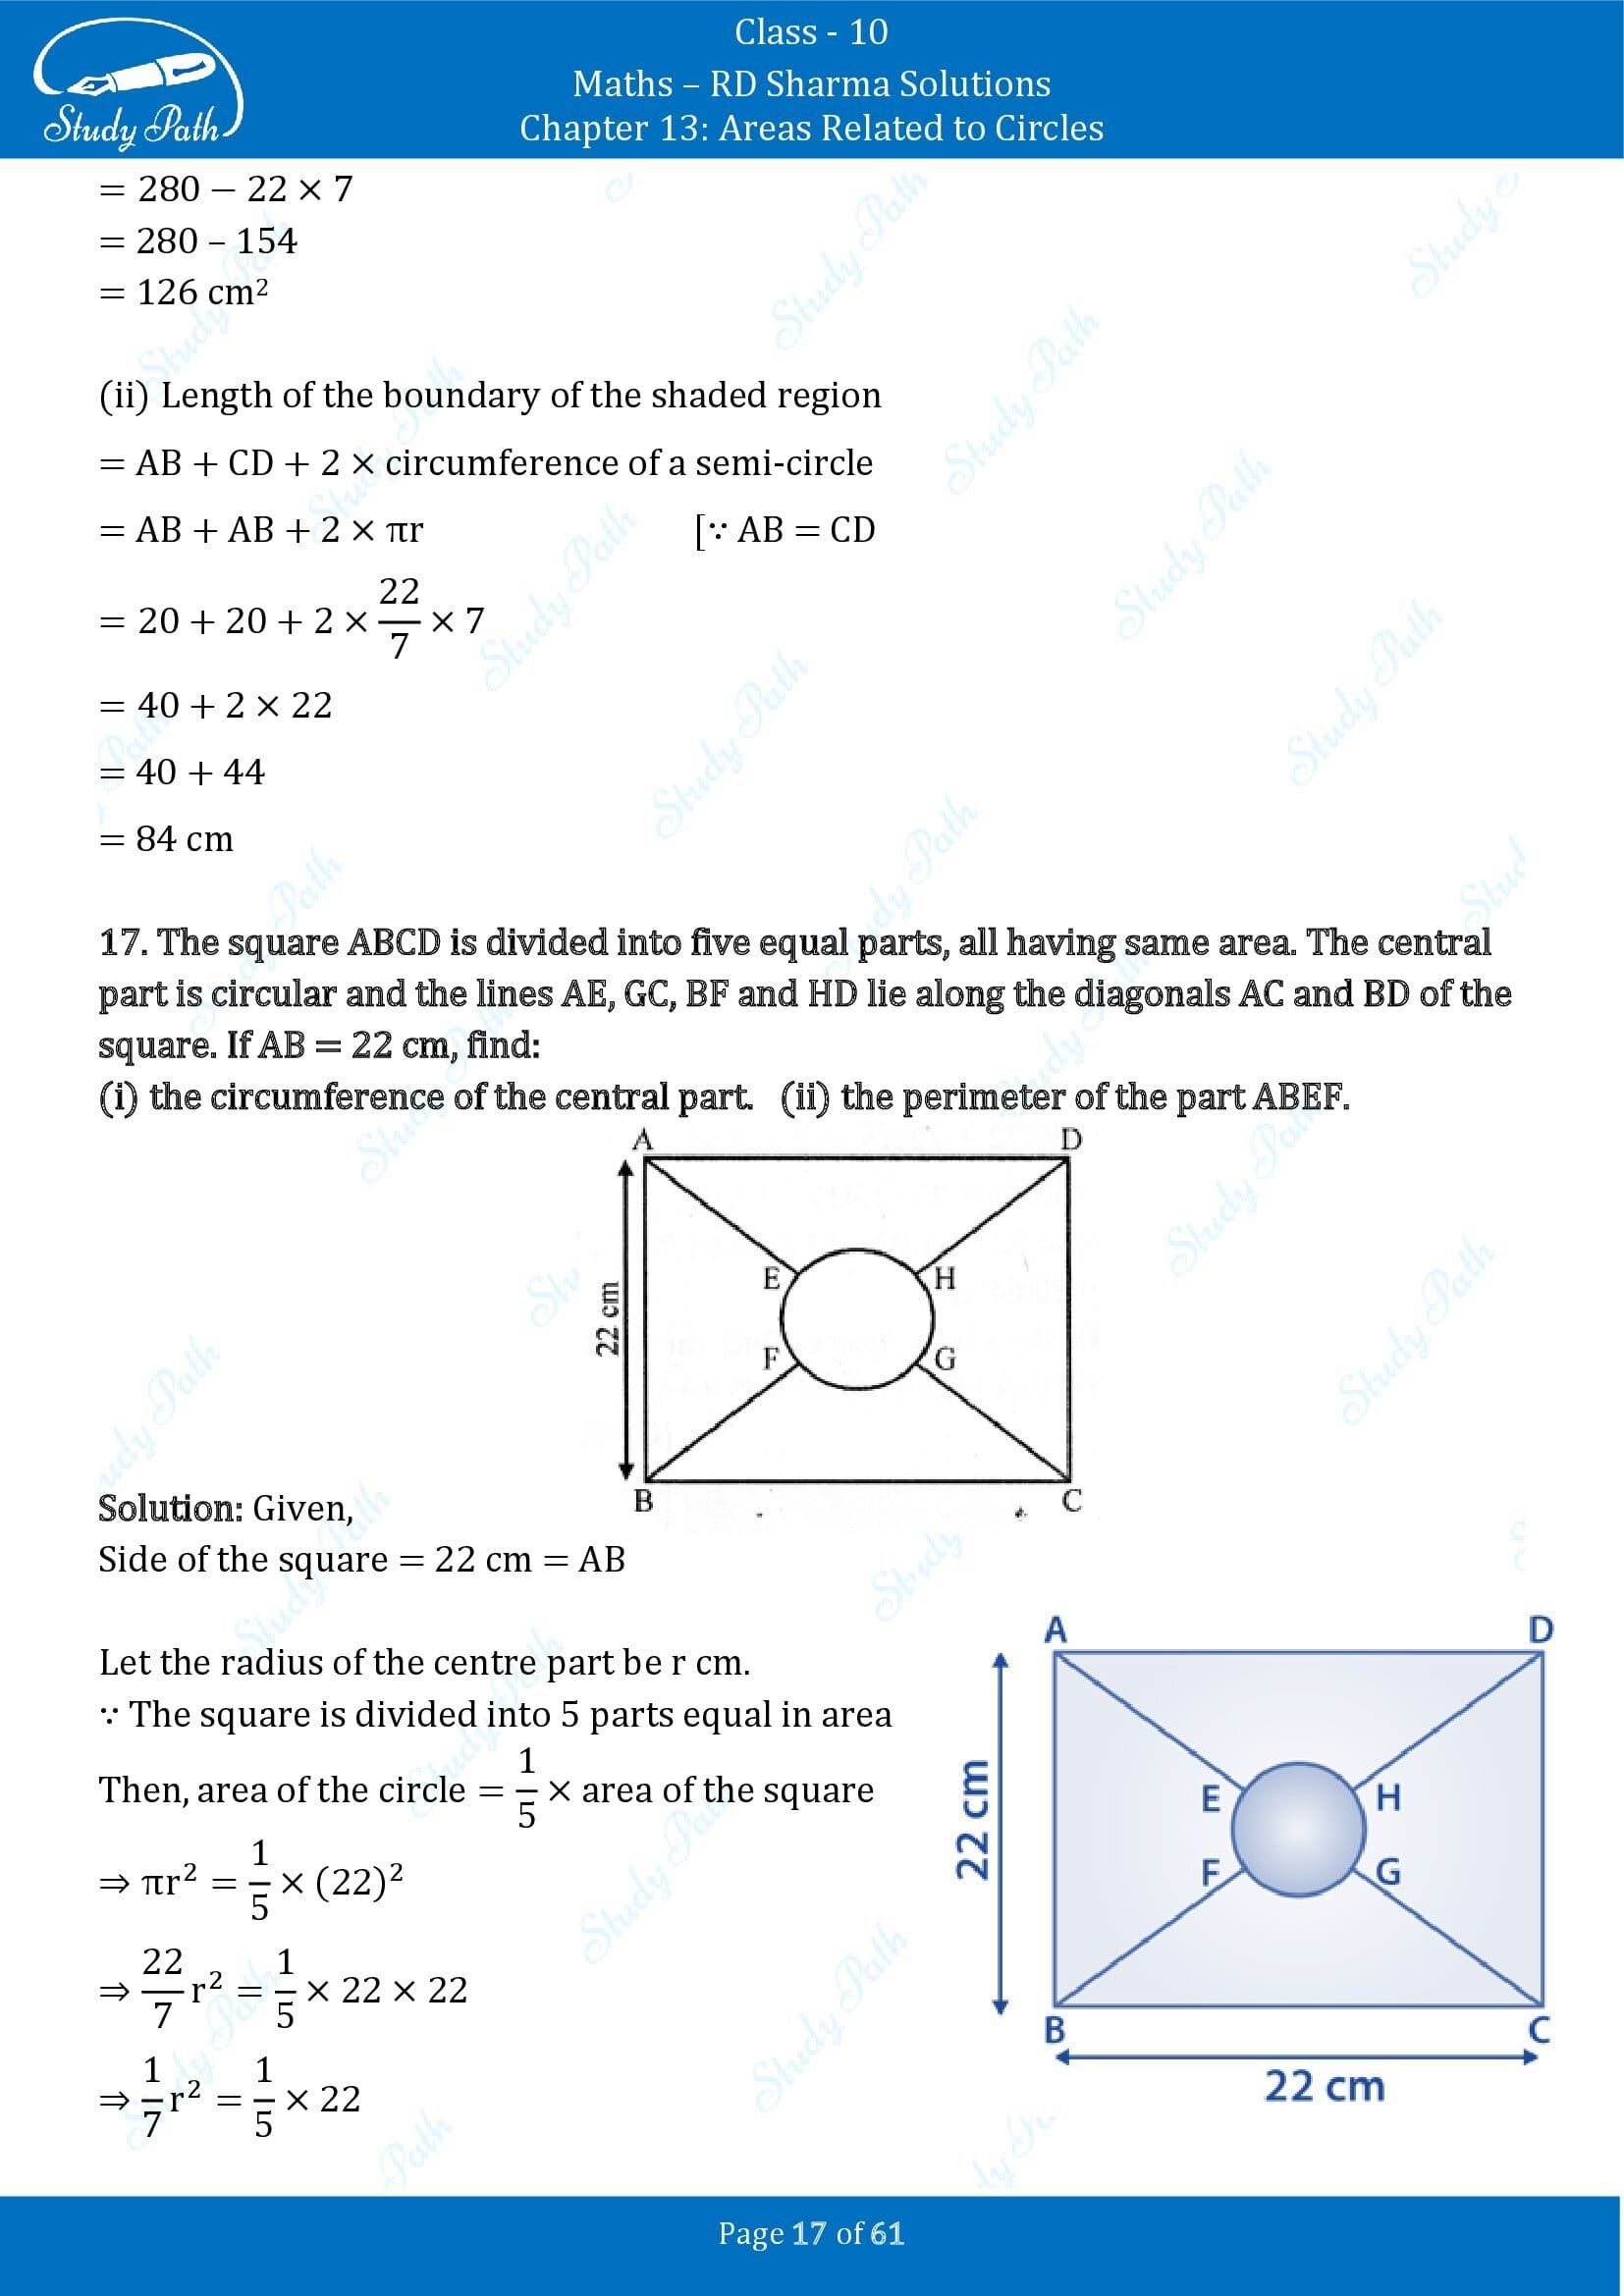 RD Sharma Solutions Class 10 Chapter 13 Areas Related to Circles Exercise 13.4 00017